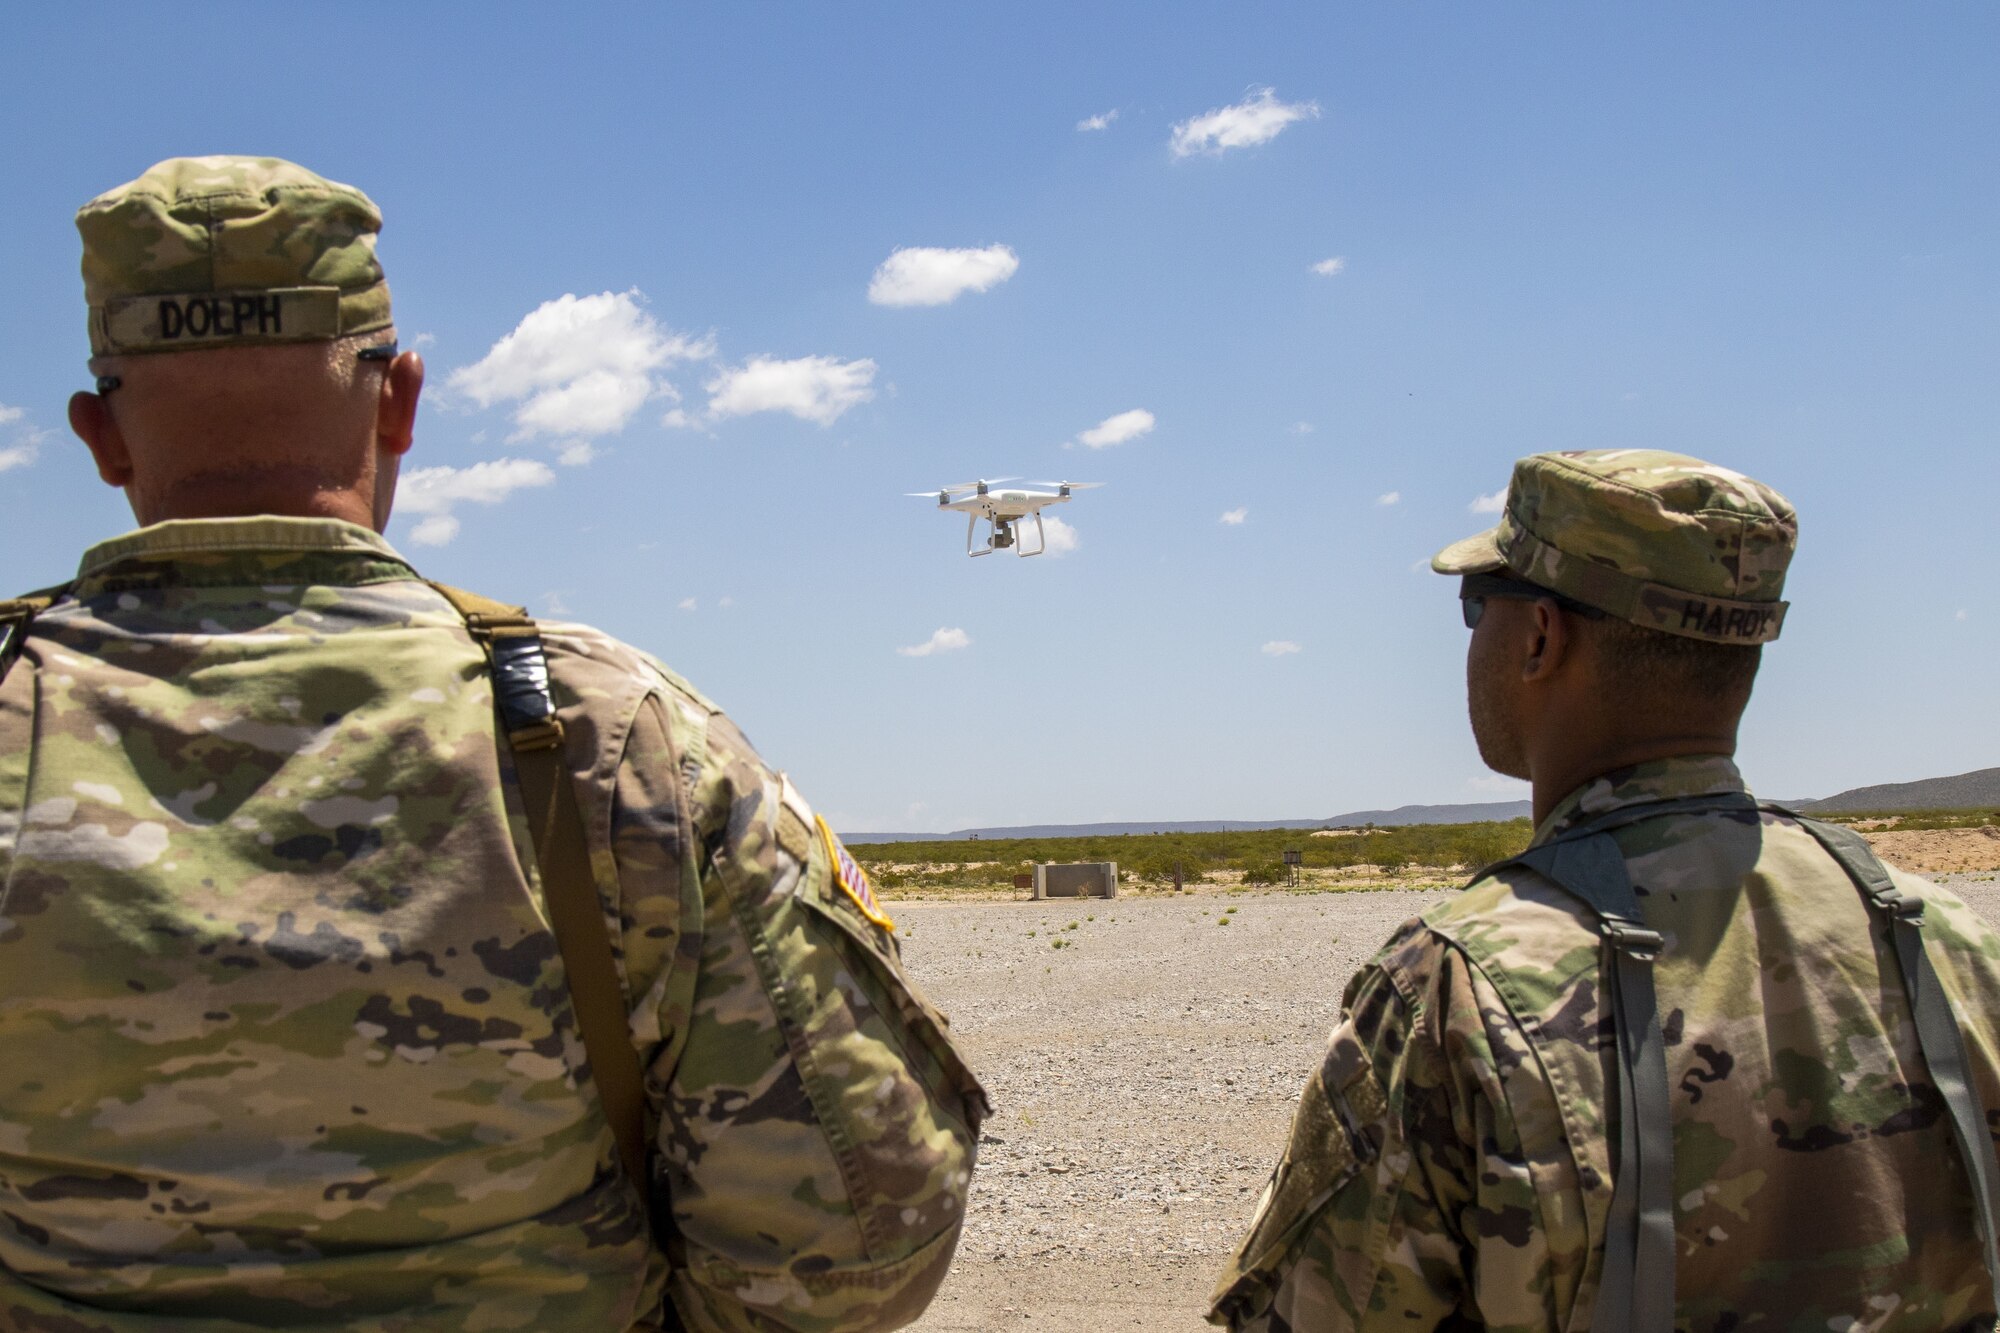 Soldiers from the 5th Armored Brigade, First Army Division West, test the capabilities of commercial, off-the-shelf unmanned aerial surveillance vehicles at McGregor Range Complex, N.M., in June 2019. To discuss emerging threats posed by small UAS, military and industry leaders in anti-drone technology came together for “Defending and Defeating,” a C-sUAS symposium co-hosted by the Force Protection Division, Hanscom Air Force Base, Mass., and the Paul Revere Chapter of the Air Force Association. (U.S. Army Photo by Staff Sgt. Timothy Gray)